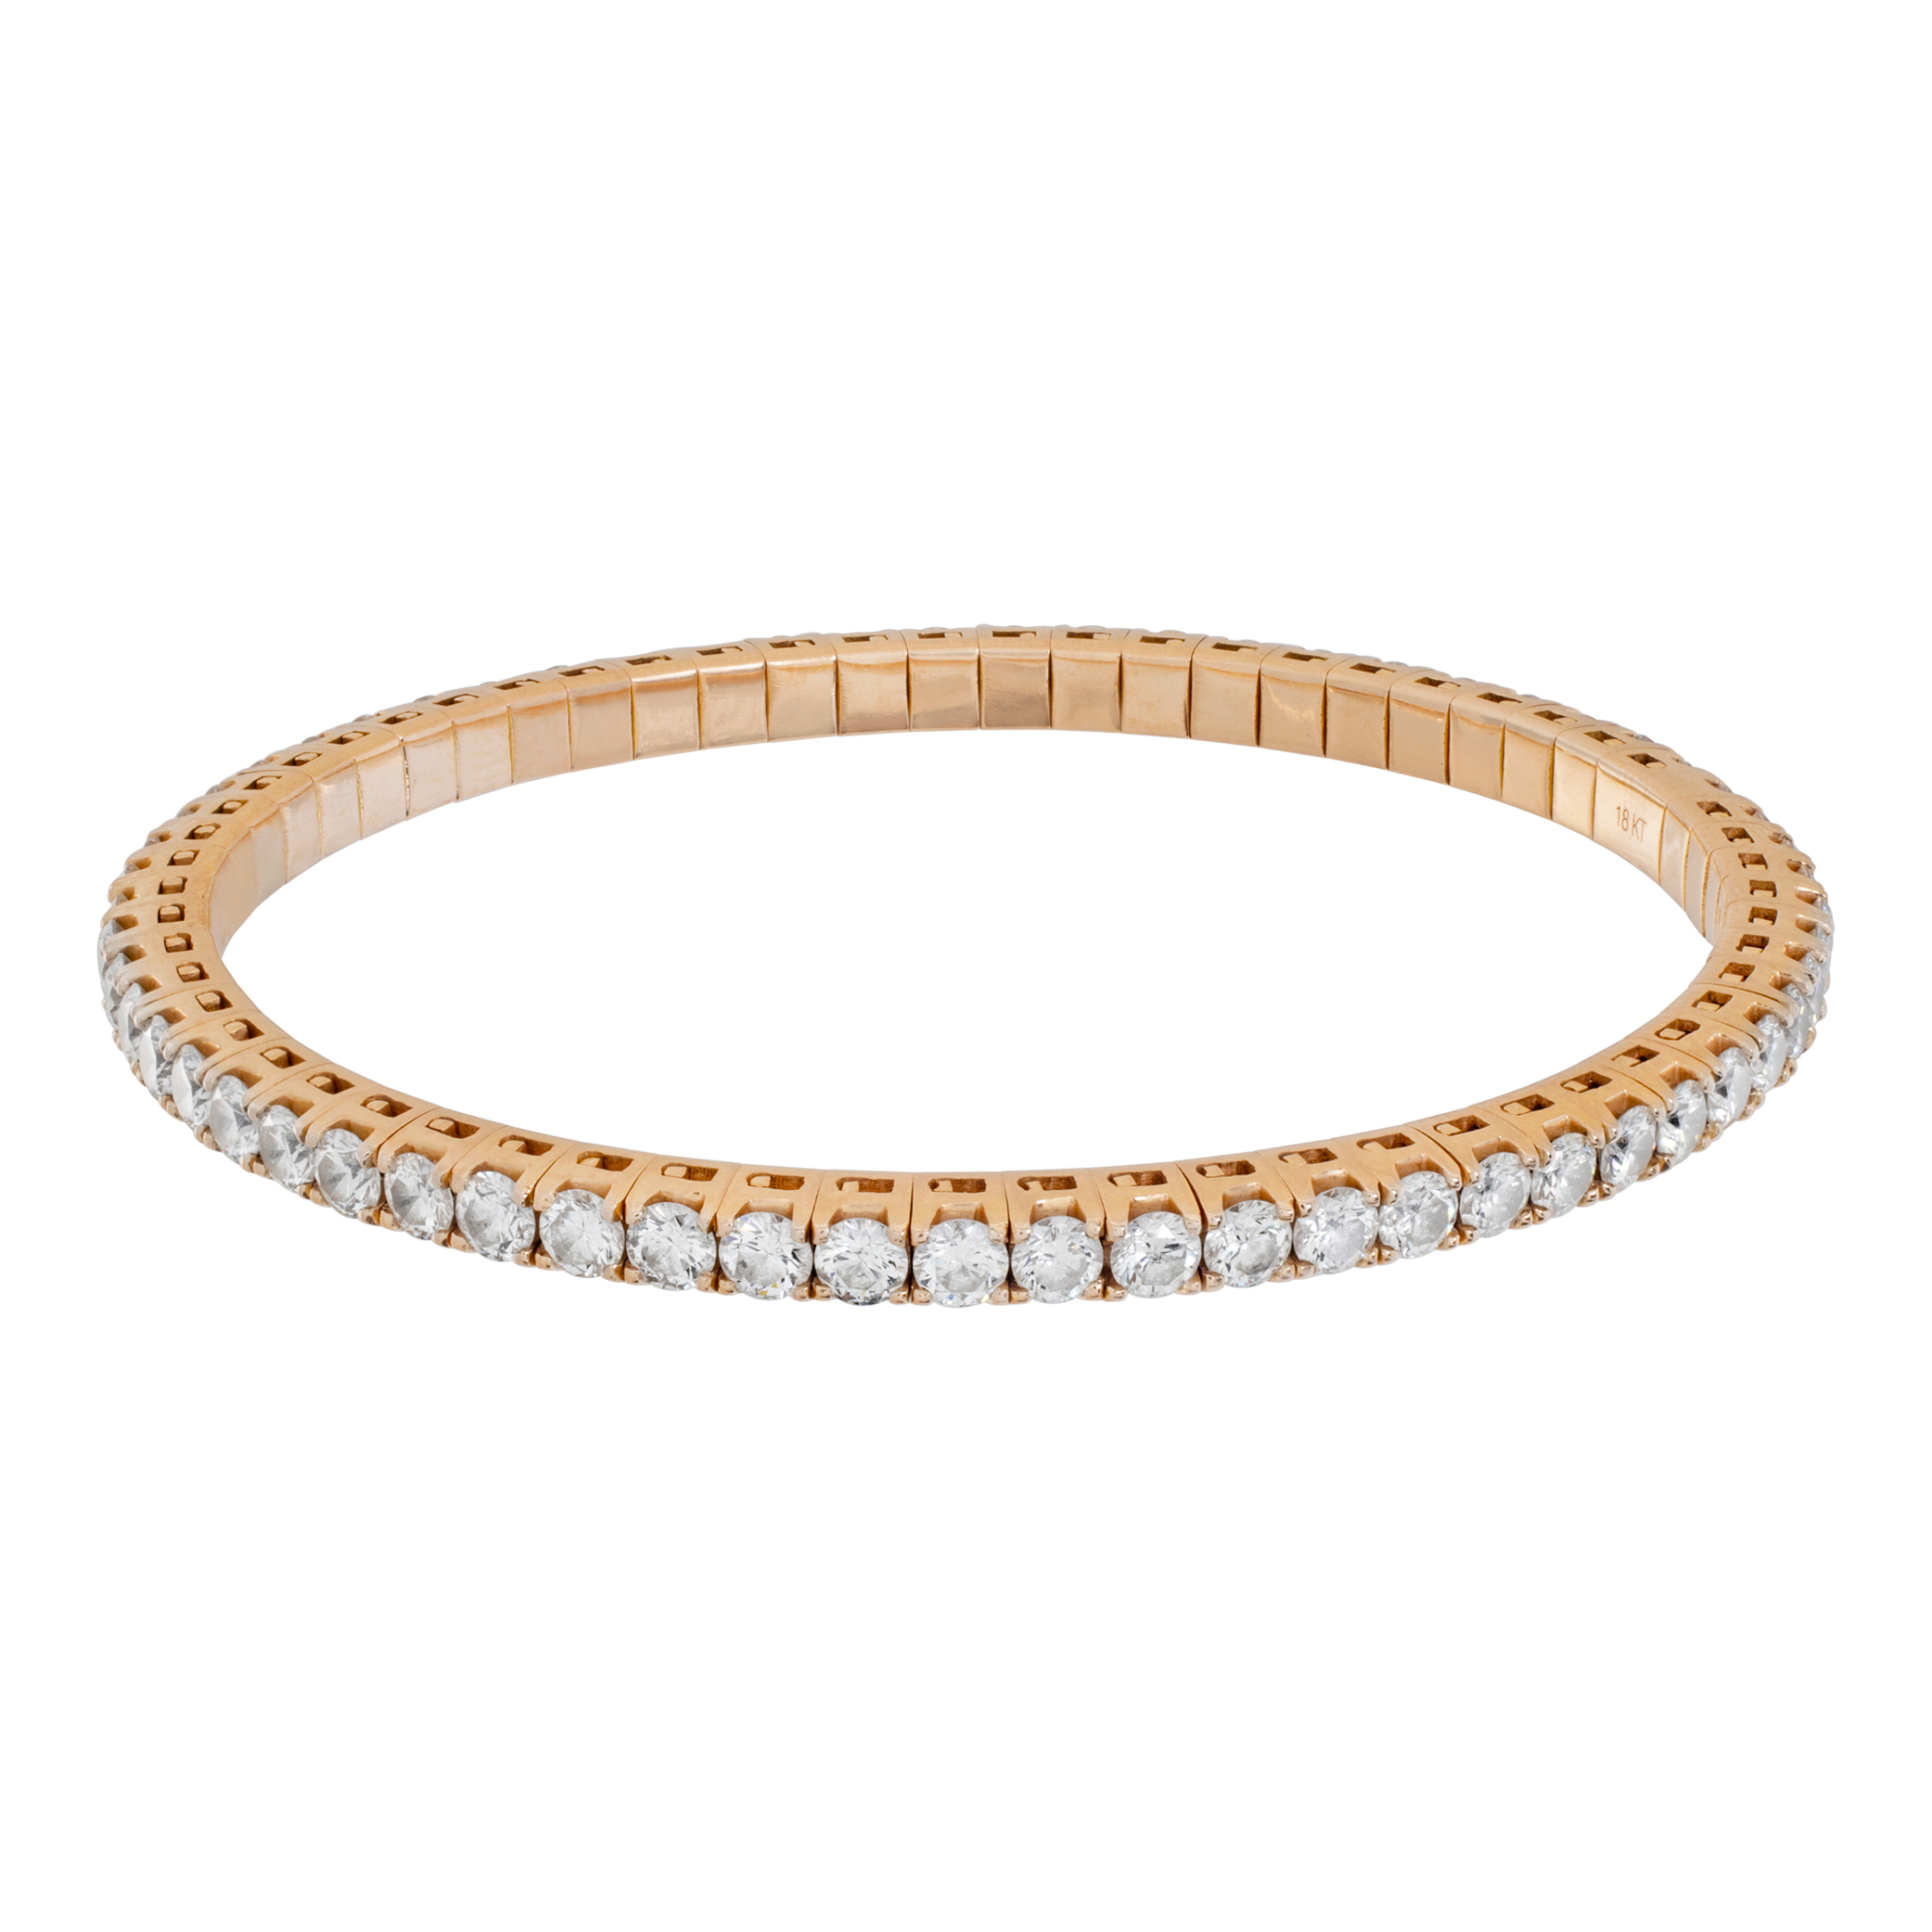 Round Brilliant Cut Diamonds Flexible Bangle Bracelet In 18k Rose Gold. Round Brilliant Cut Diamonds Total Approx. Weight Over 6.00 Carats,